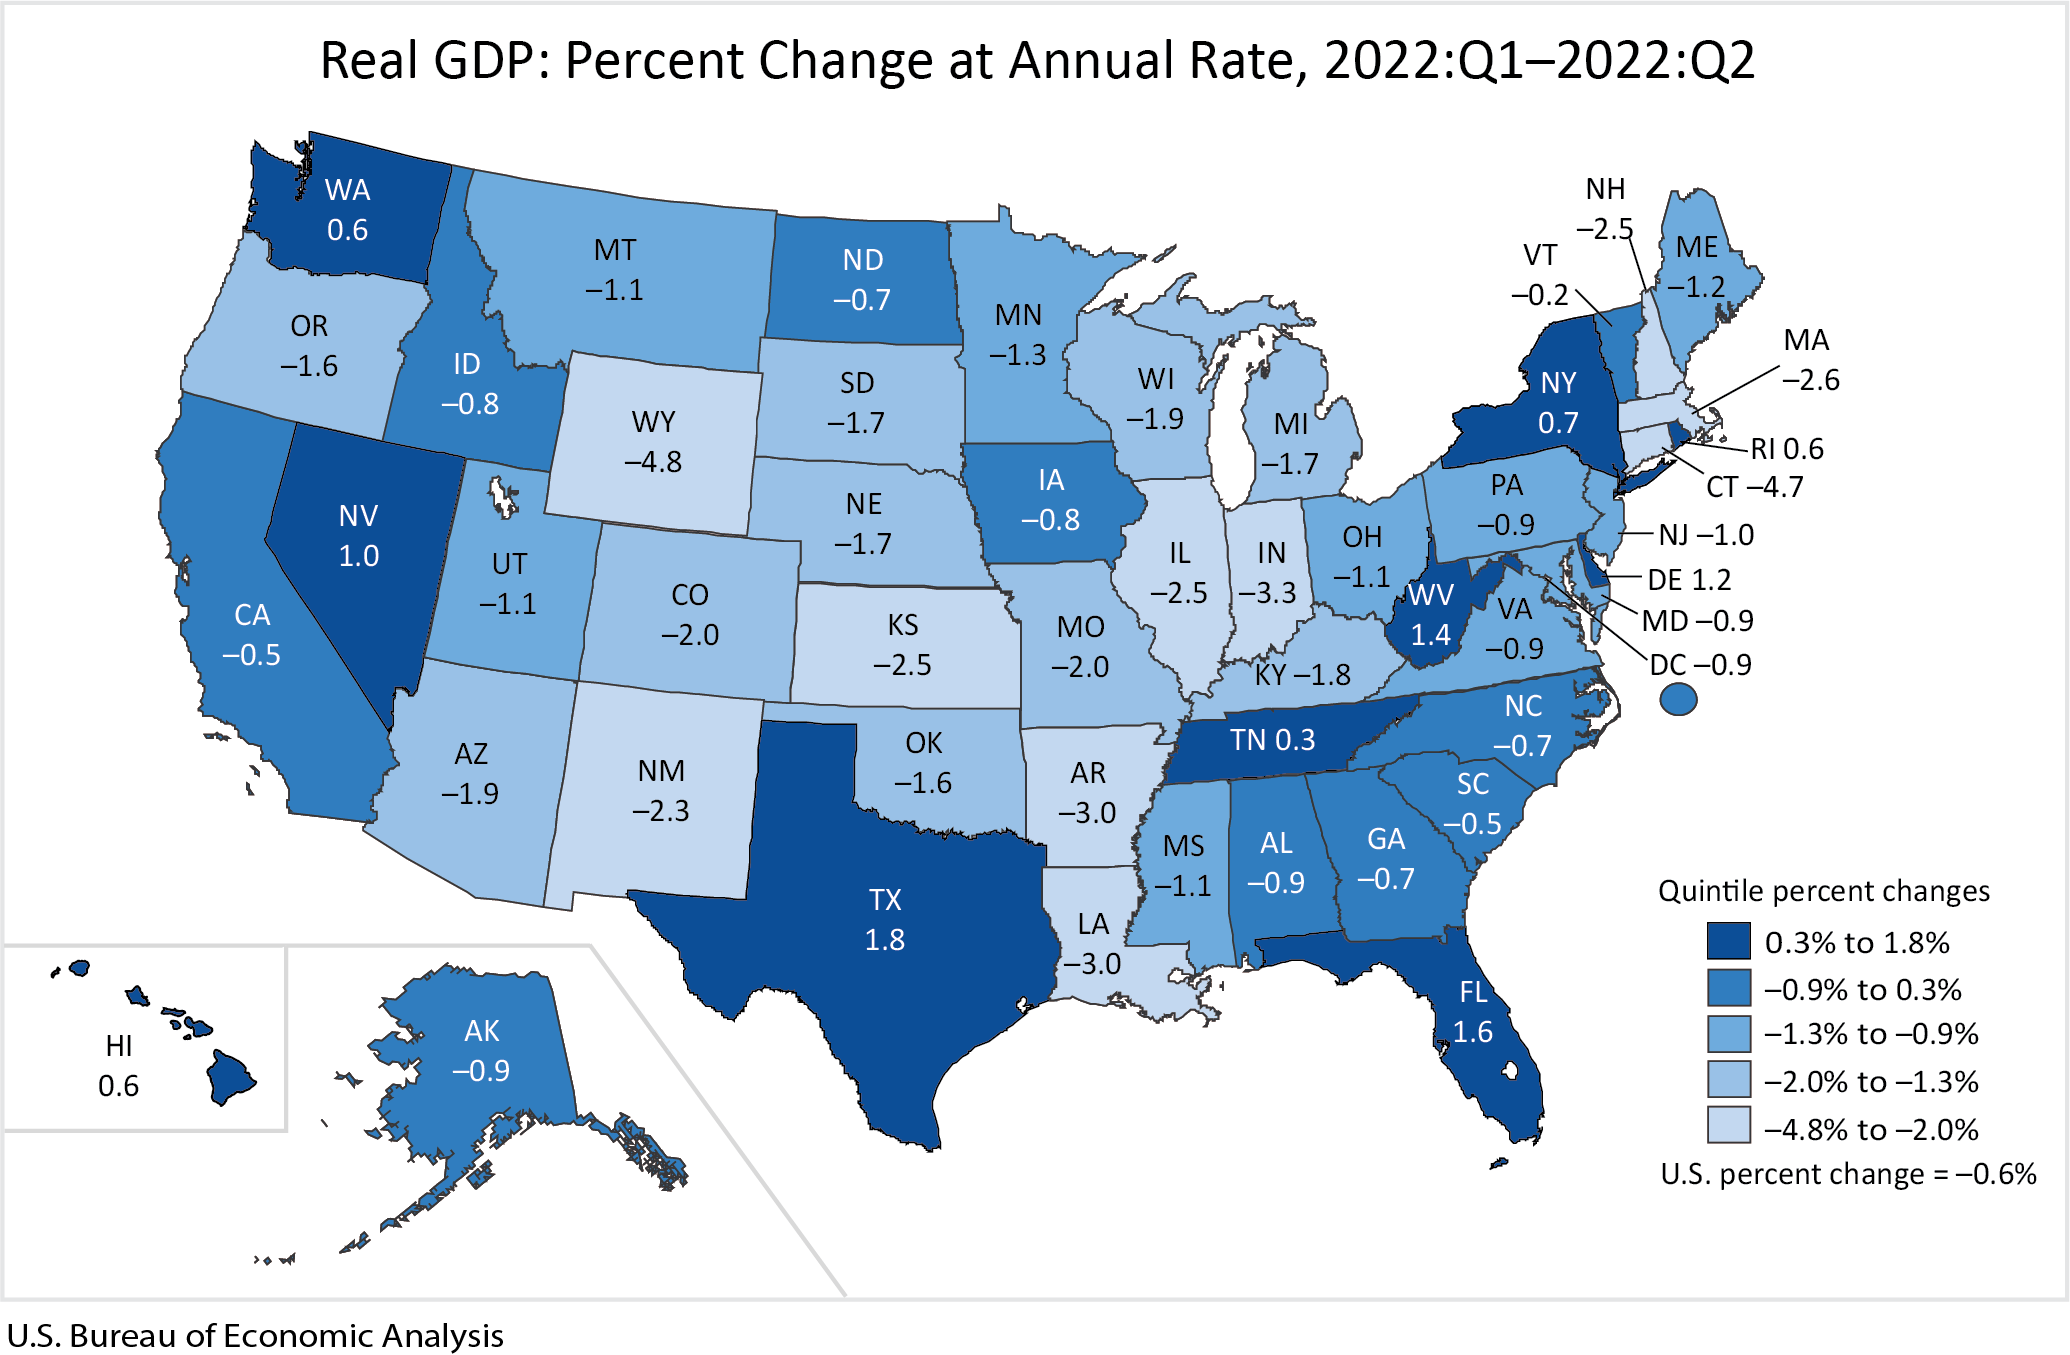 Real GDP: Percent Change at Annual Rate, 2022:Q1-2022:Q2